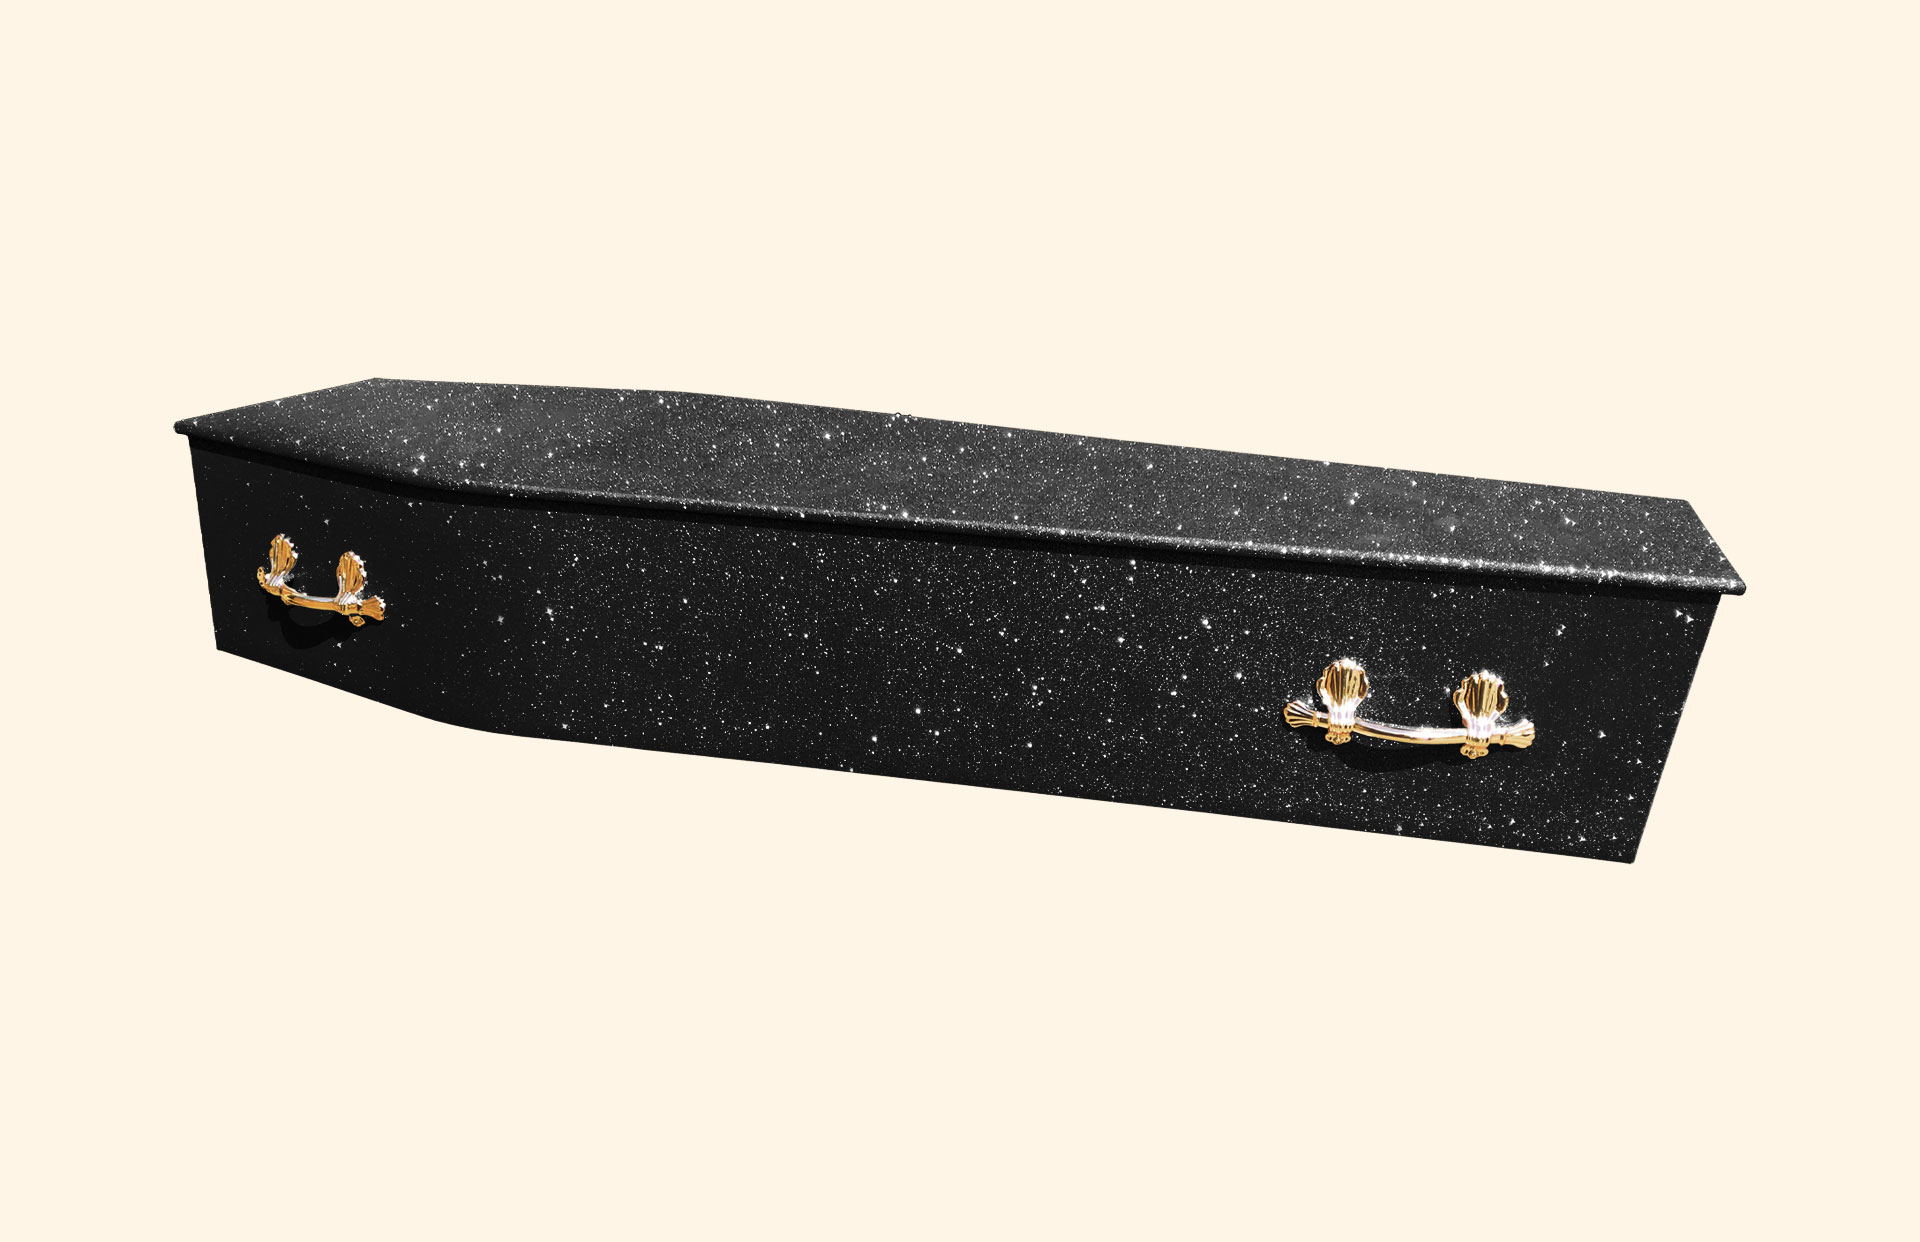 Black Glitter over a traditional coffin